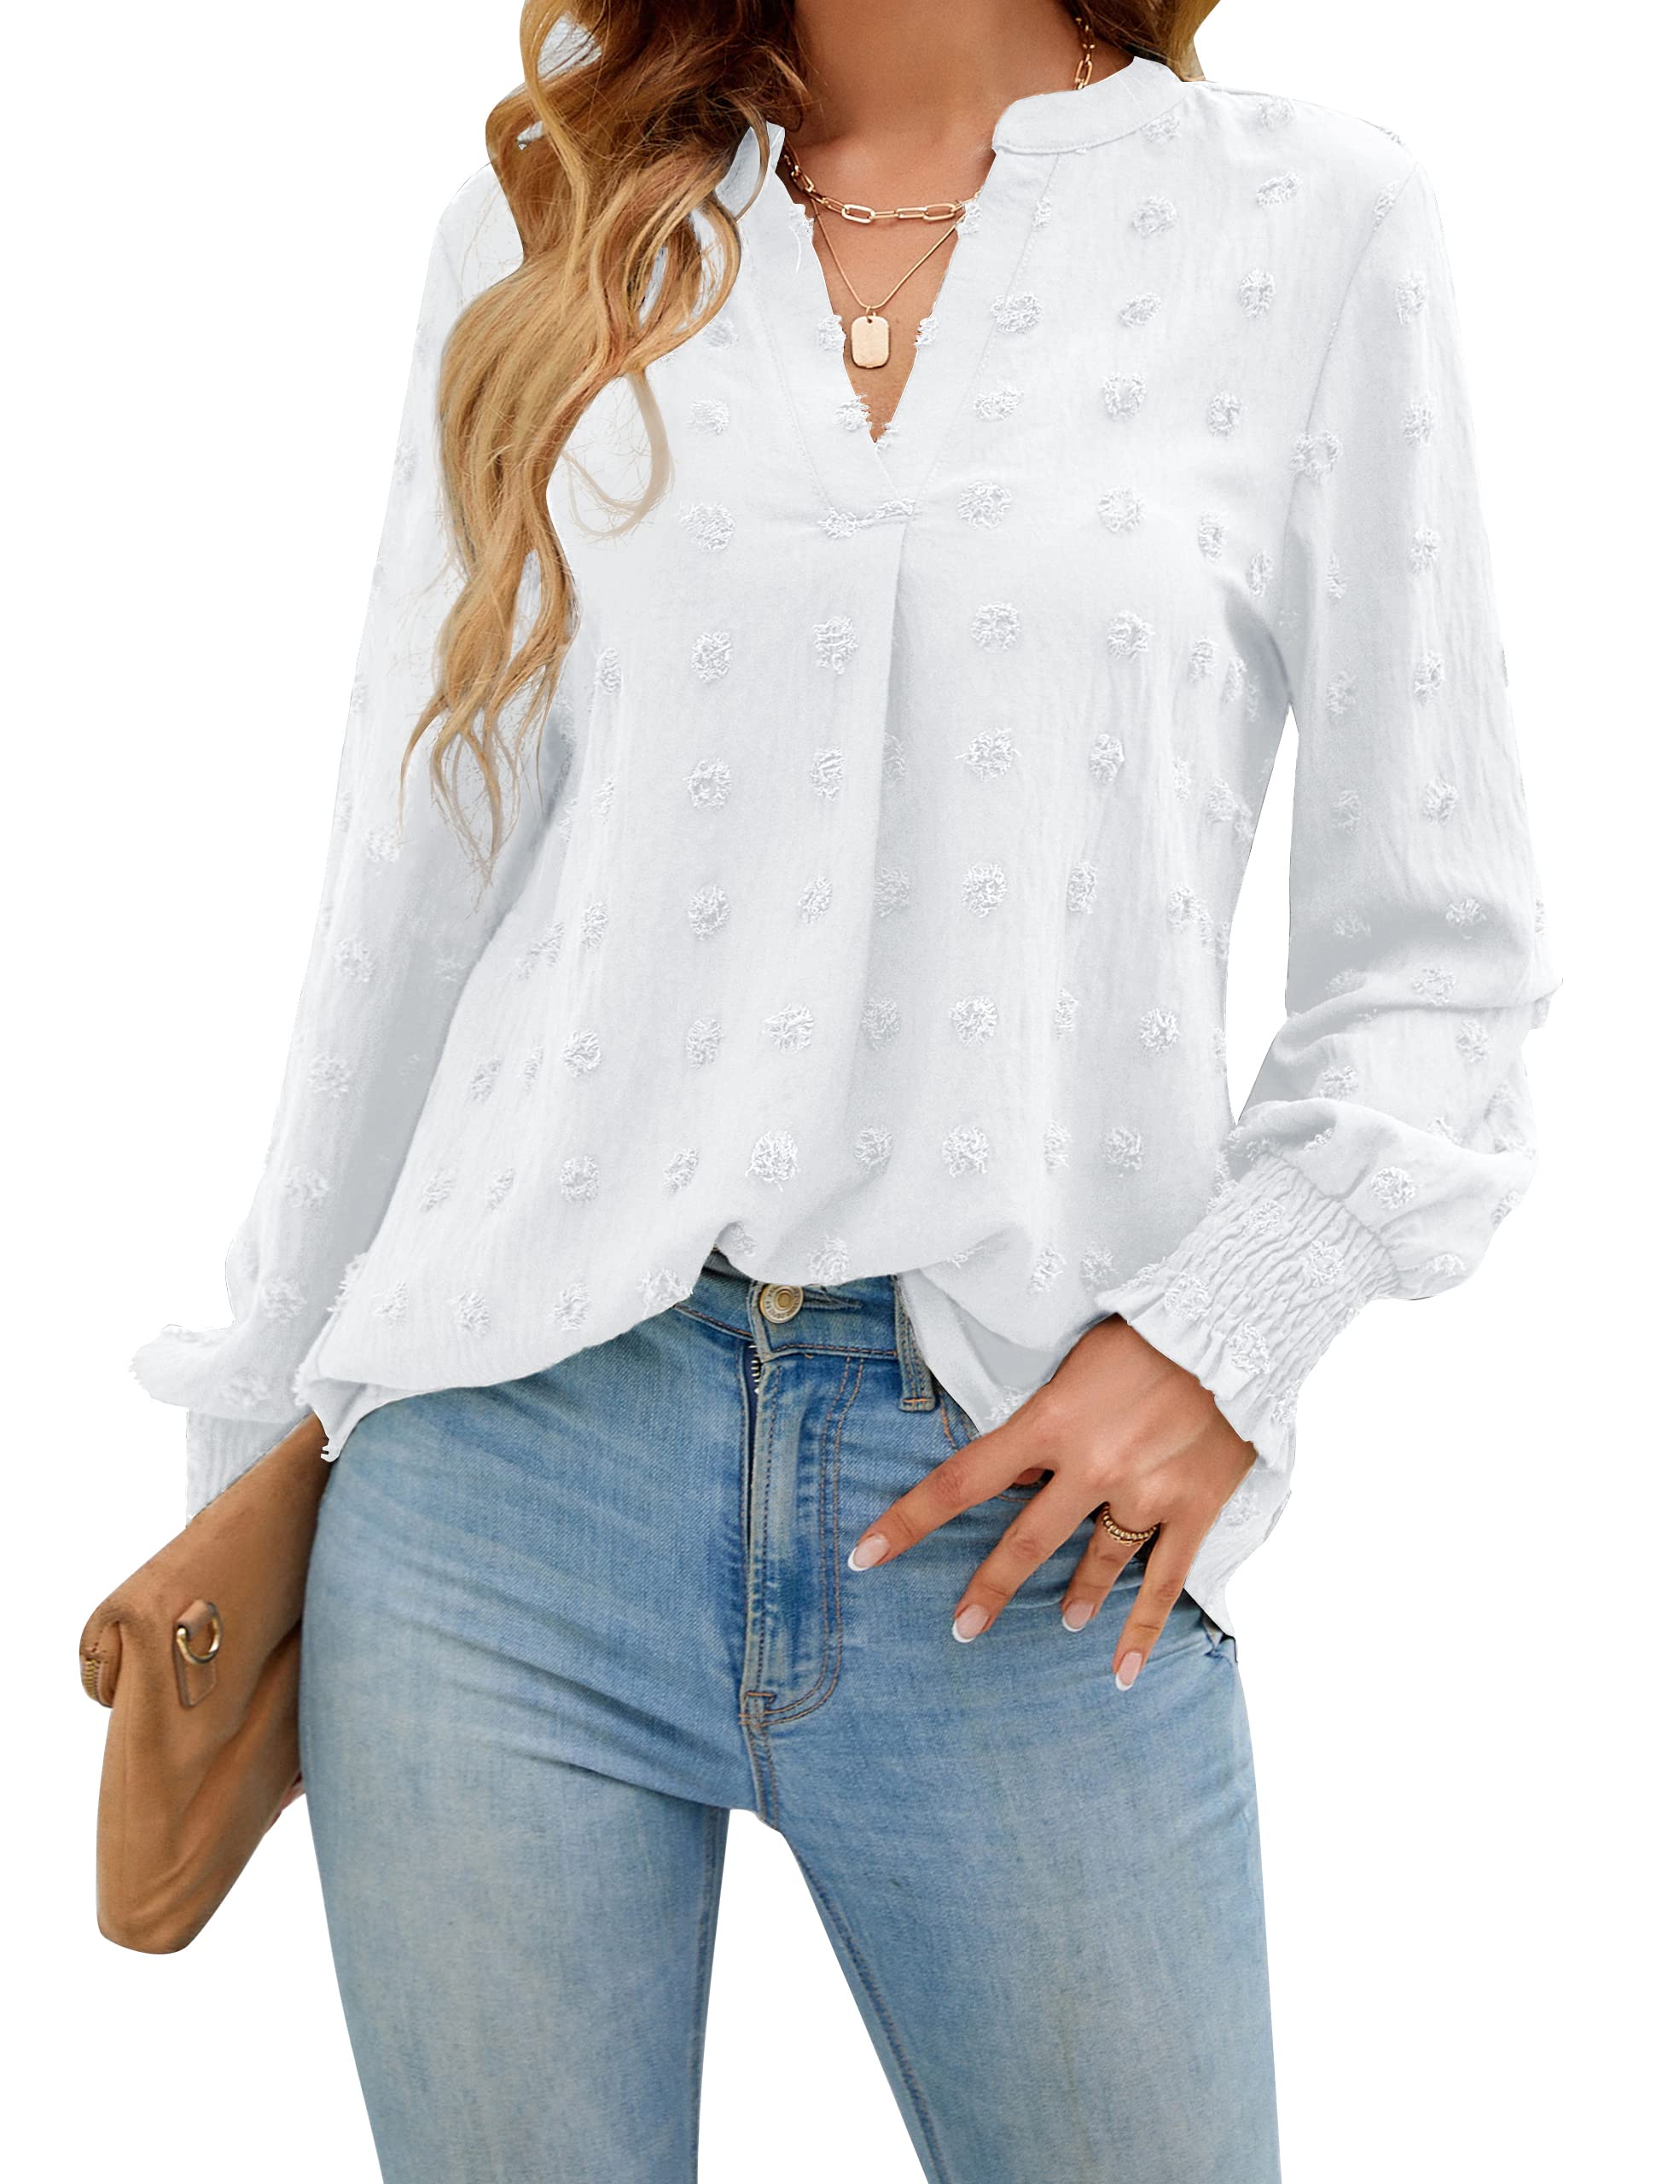 Blooming Jelly Womens Business Casual Tops Long Sleeve V Neck Dressy Office Work Shirt Chiffon Blouse